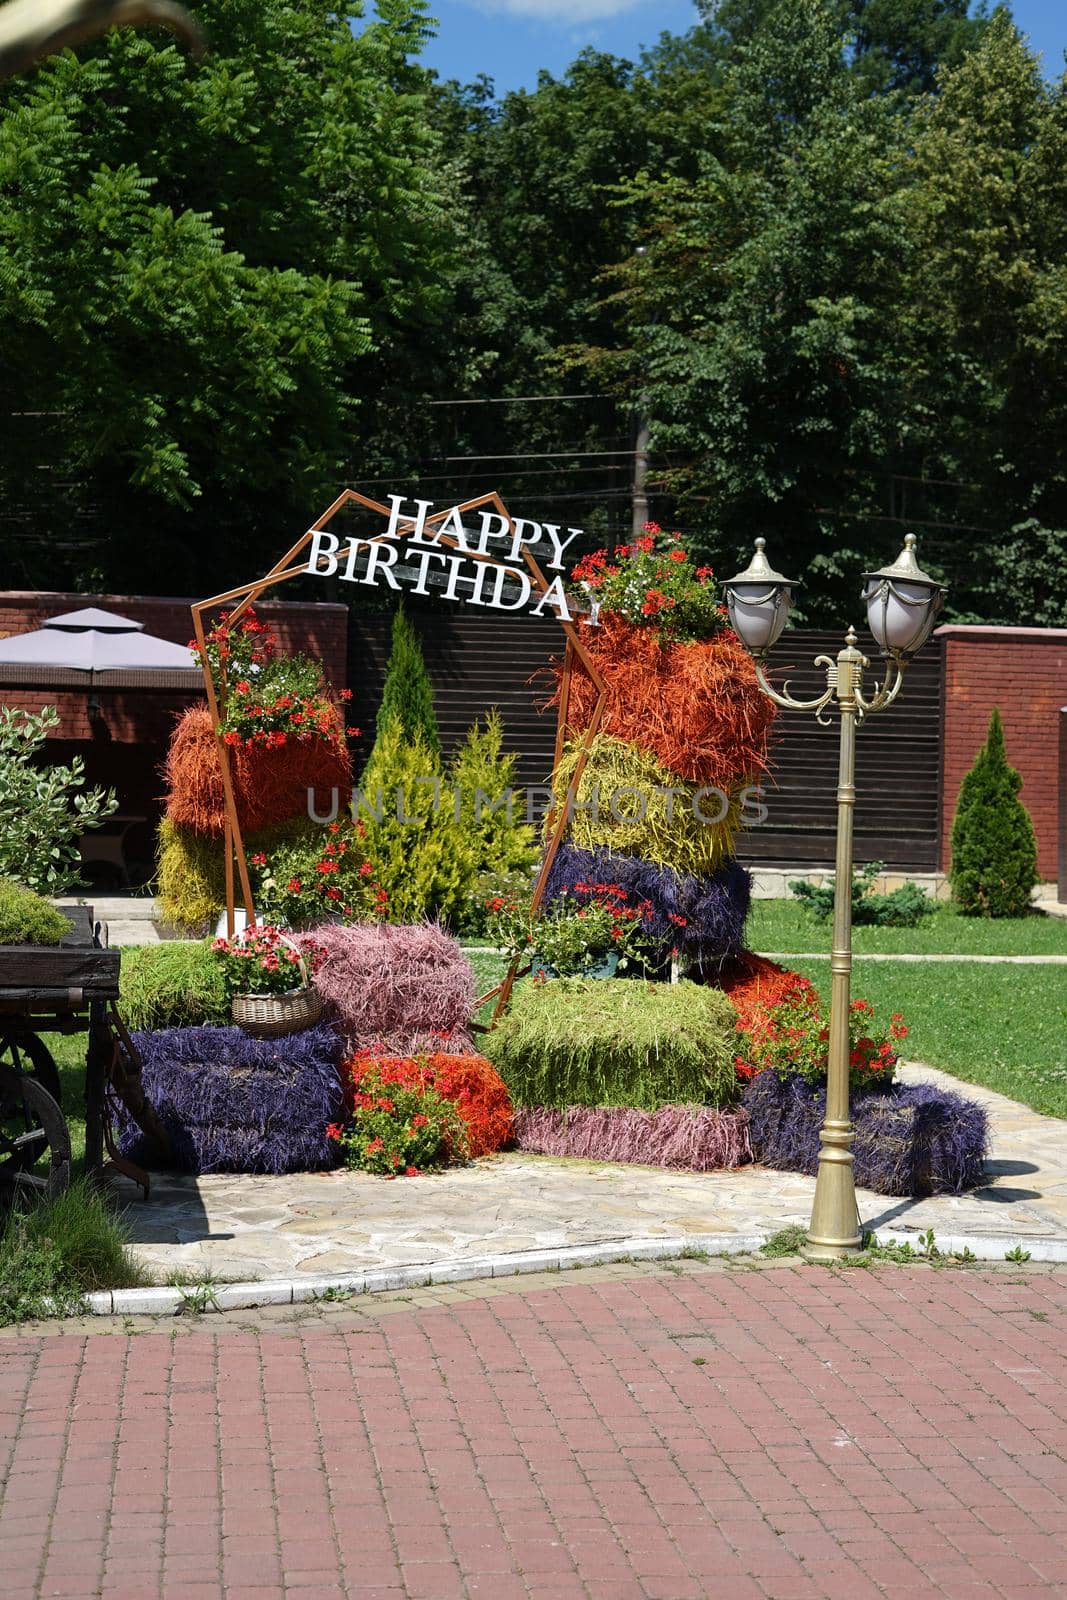 Happy birthday photo area made of natural hay bales painted in different colors by Serhii_Voroshchuk